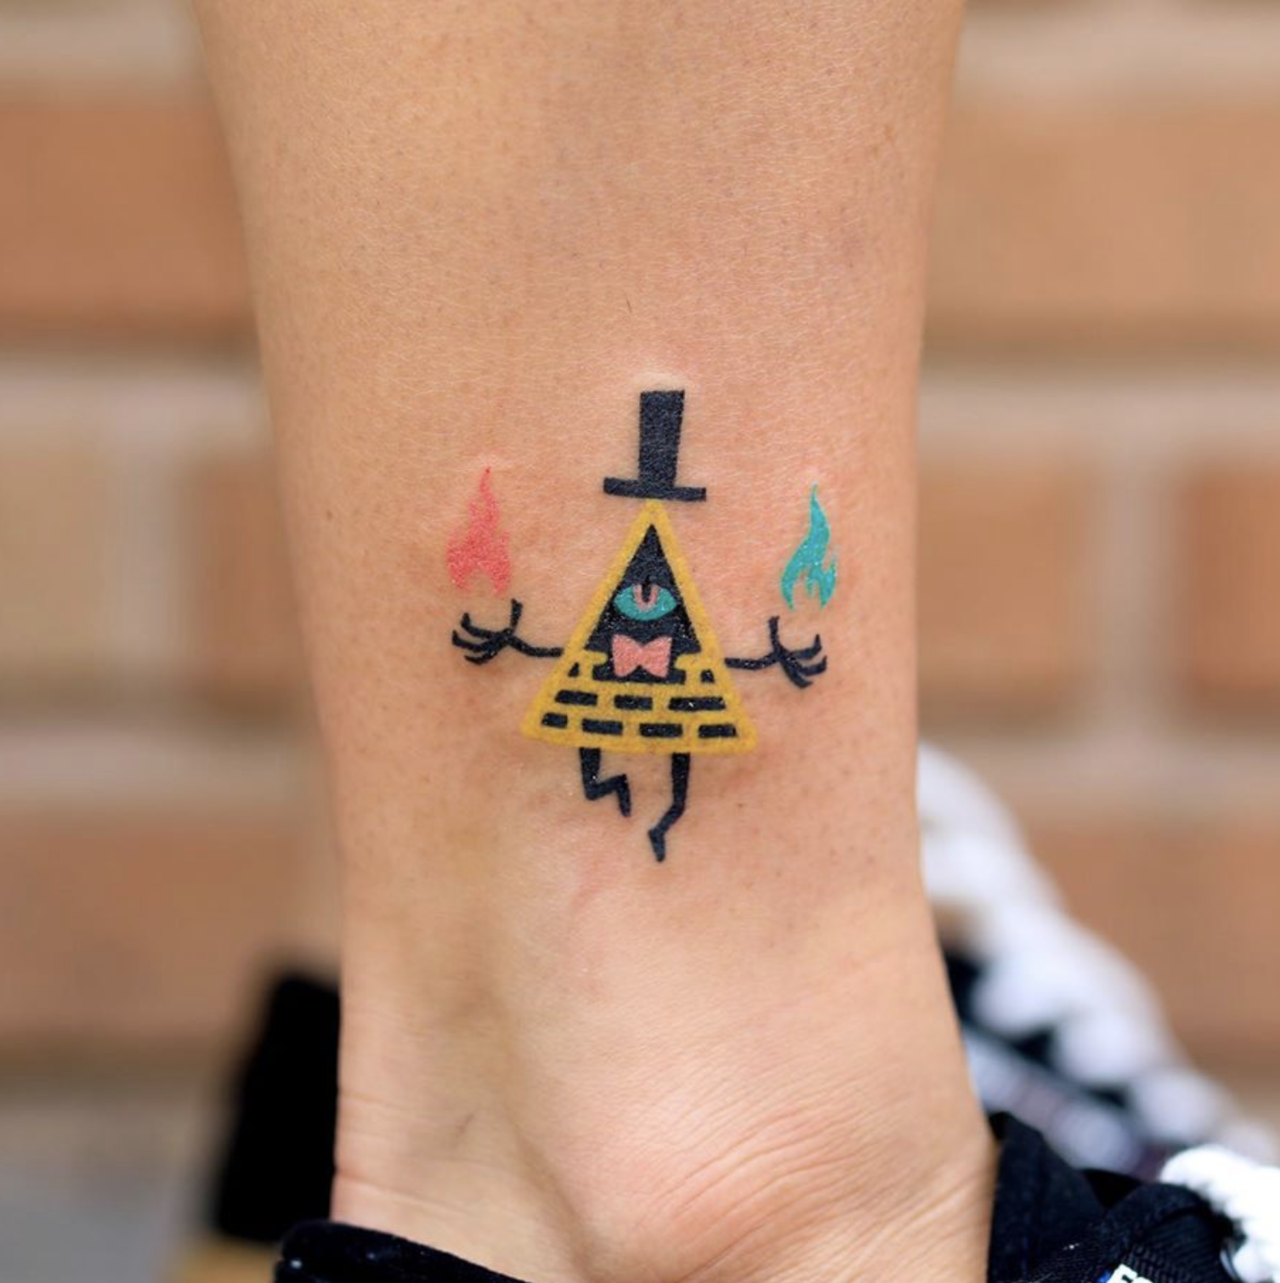 Hanna on Twitter some recent gravity falls tattoos i really enjoyed  doing httpstcoafwmUqf9uP  Twitter